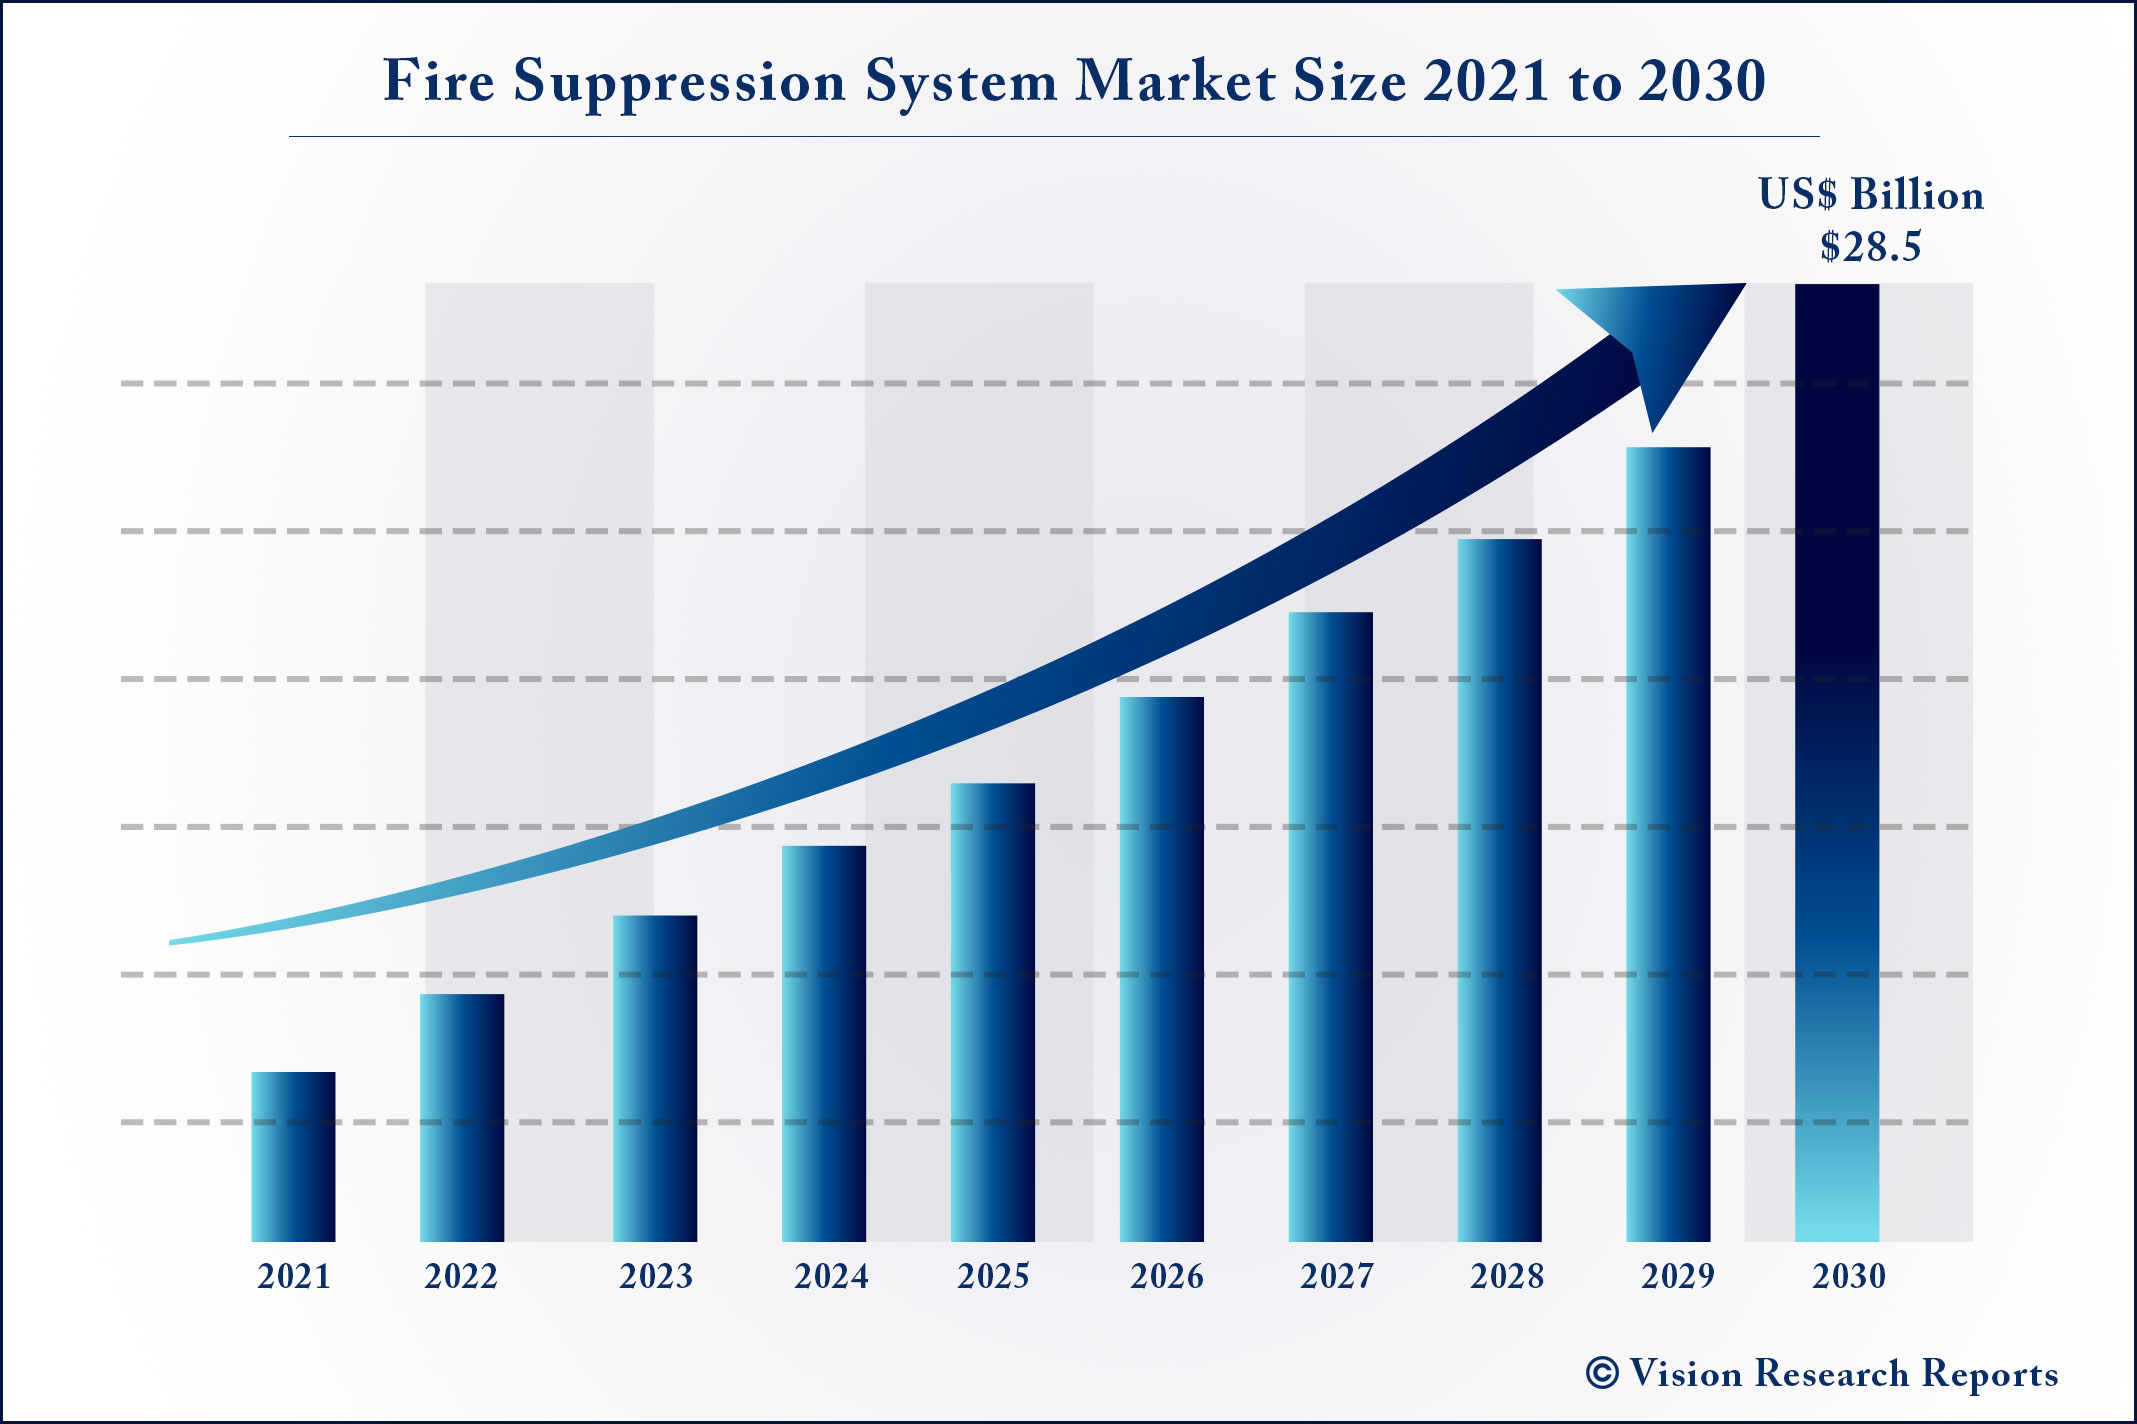 Fire Suppression System Market Size 2021 to 2030